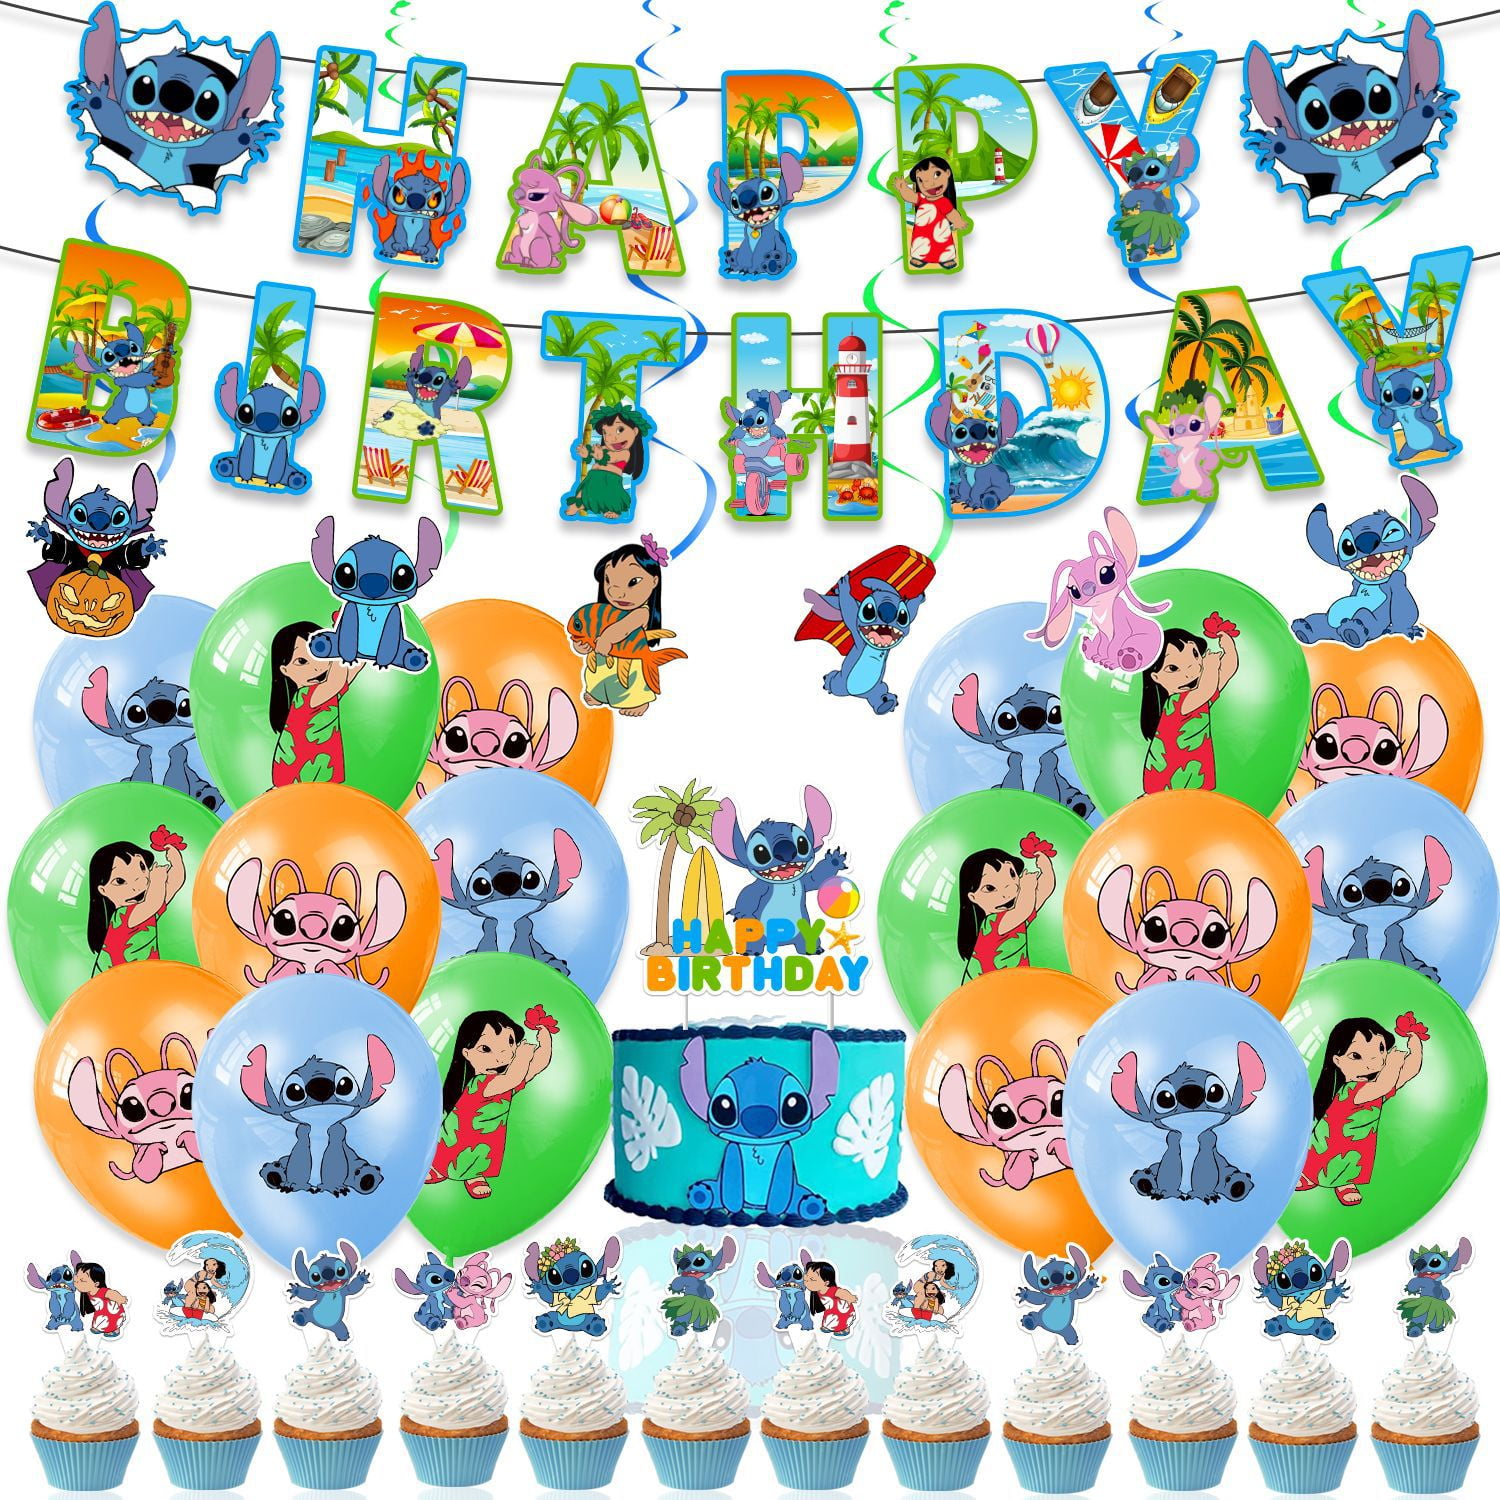 Stitch Cake Topper, Cupcake Toppers Happy Birthday Cake Topper Blue Cake  decorations, Lilo and Stitch Cake Topper Birthday Party Supplies